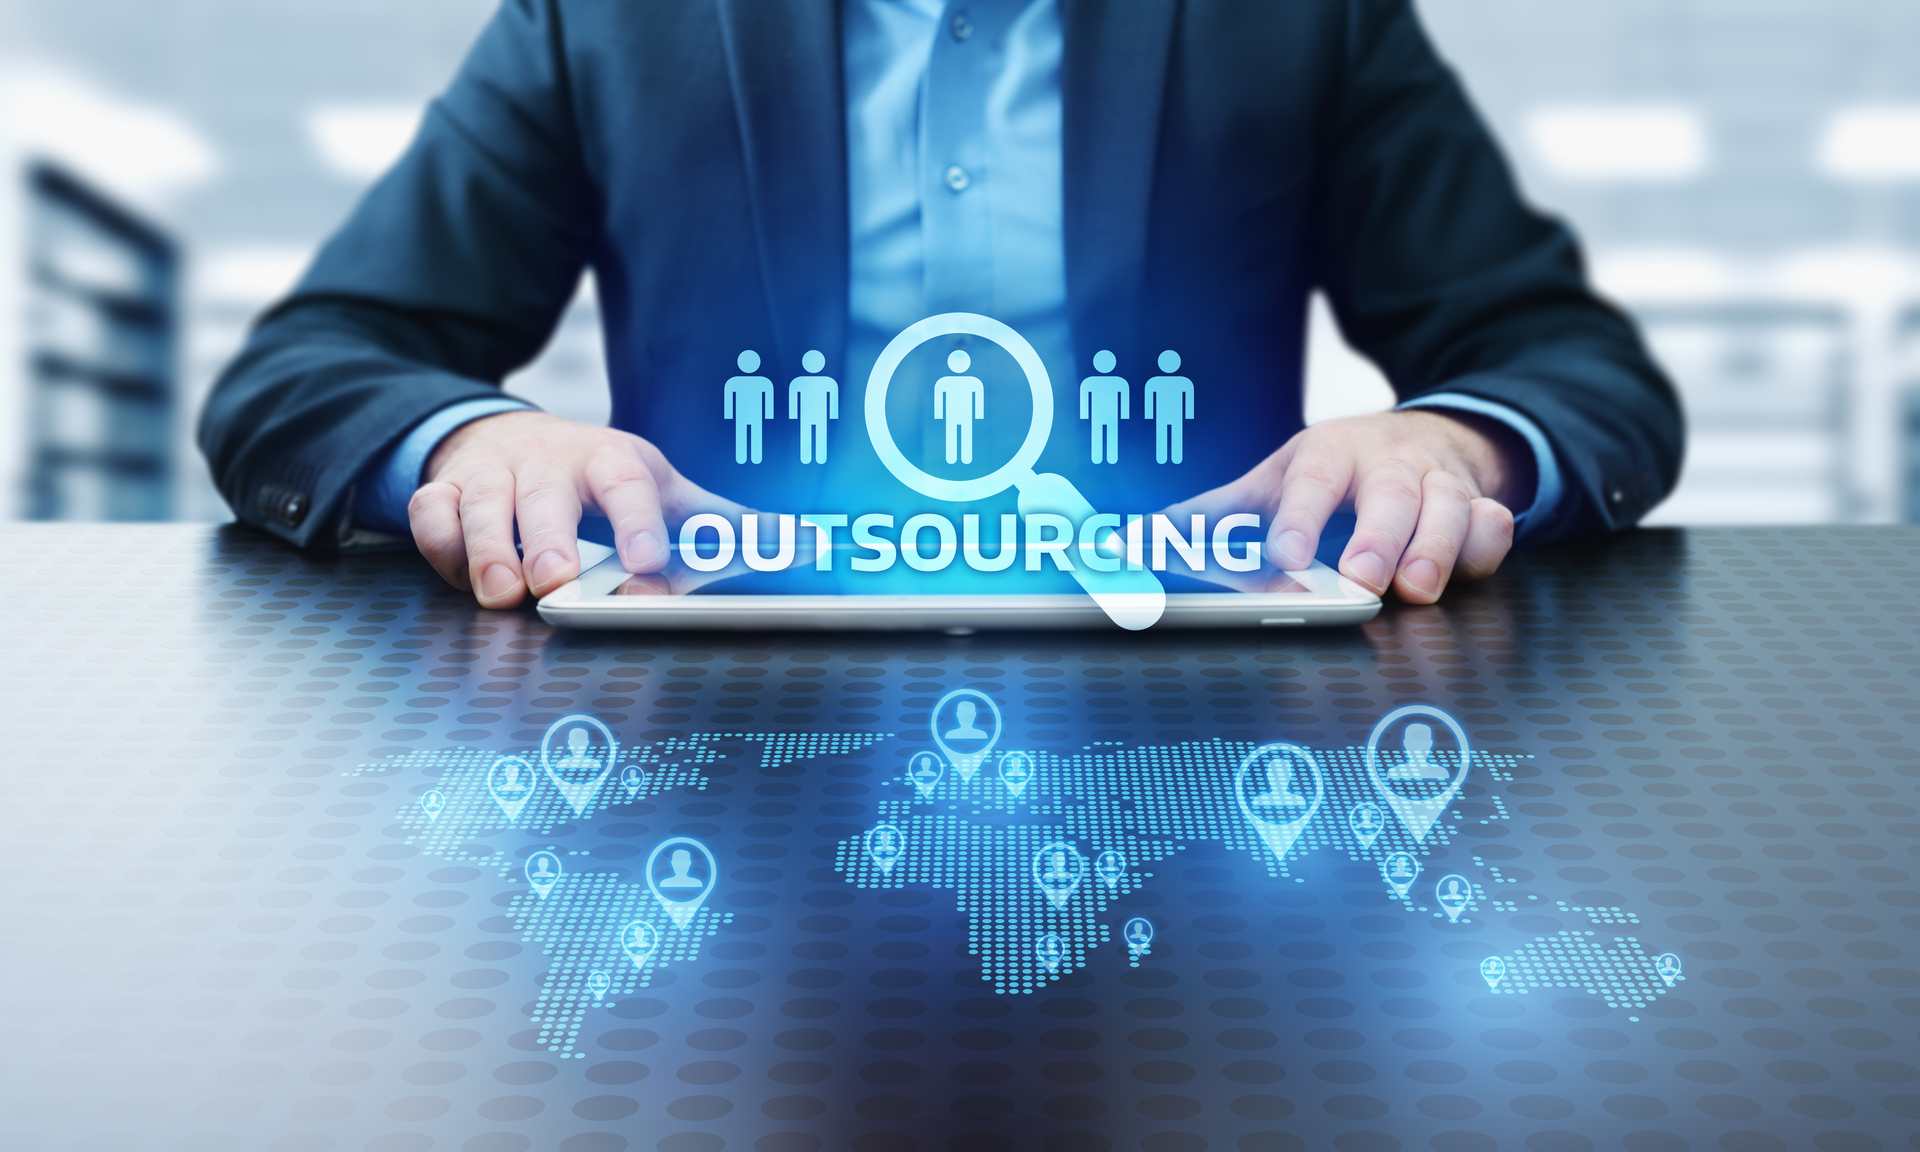 Know Incredible Benefits for Outsourcing Your Business With OS